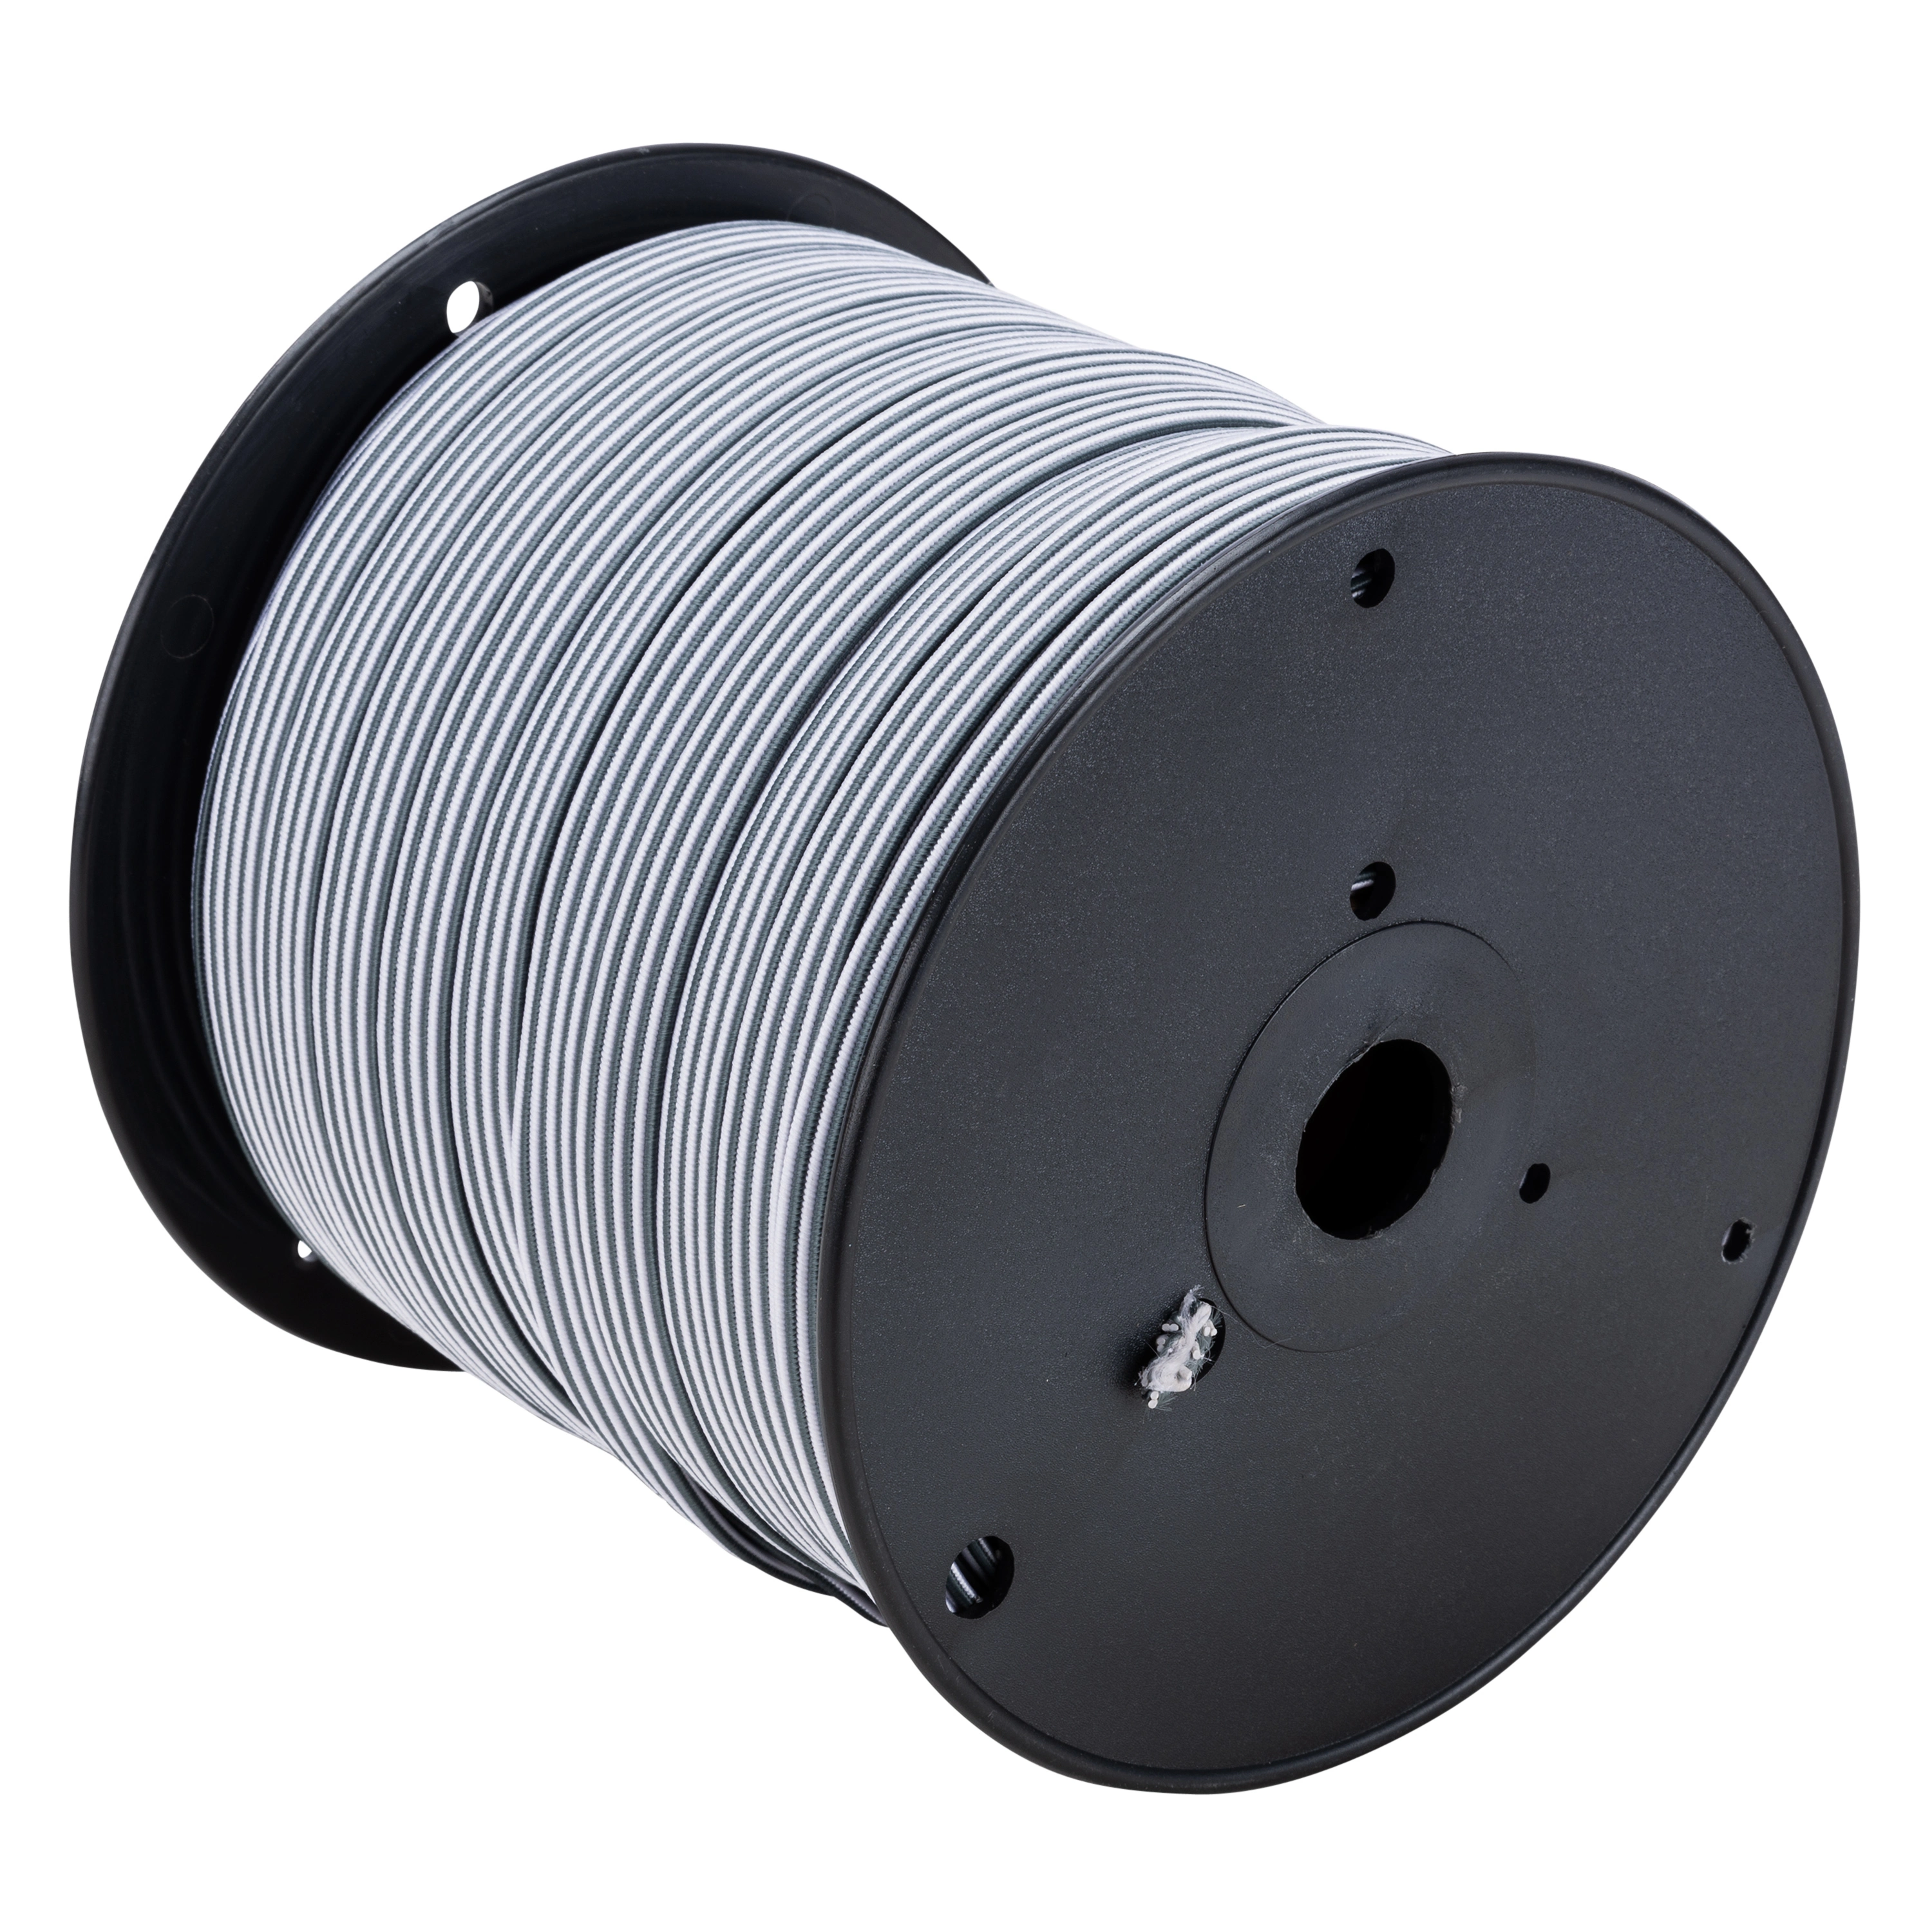 1/2" x 200' Flat Gray with White Stripe Bungee Cord Reel variant image view